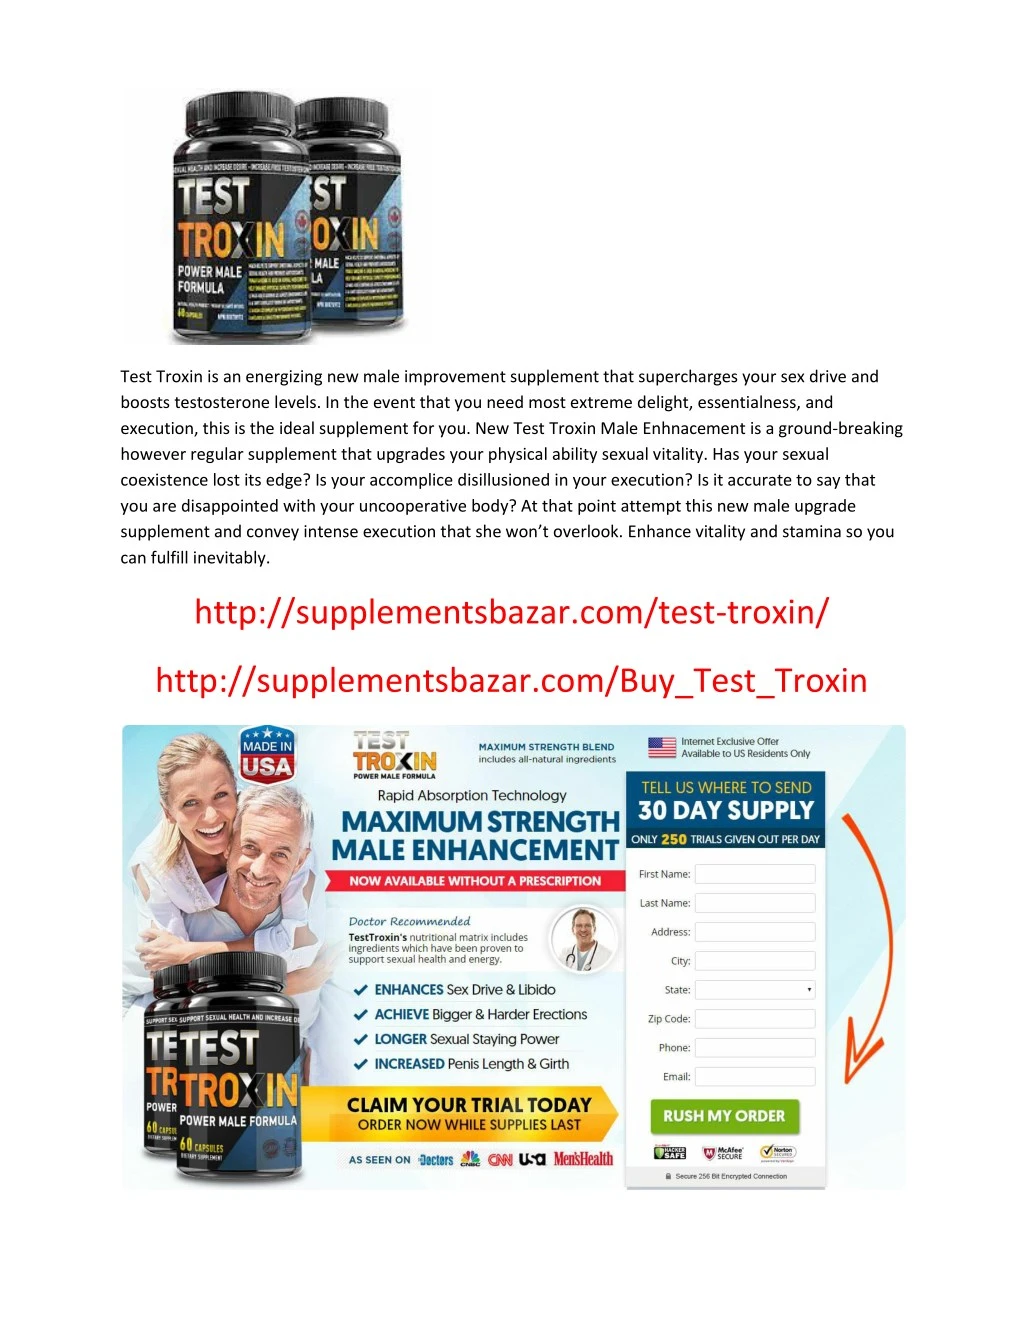 test troxin is an energizing new male improvement